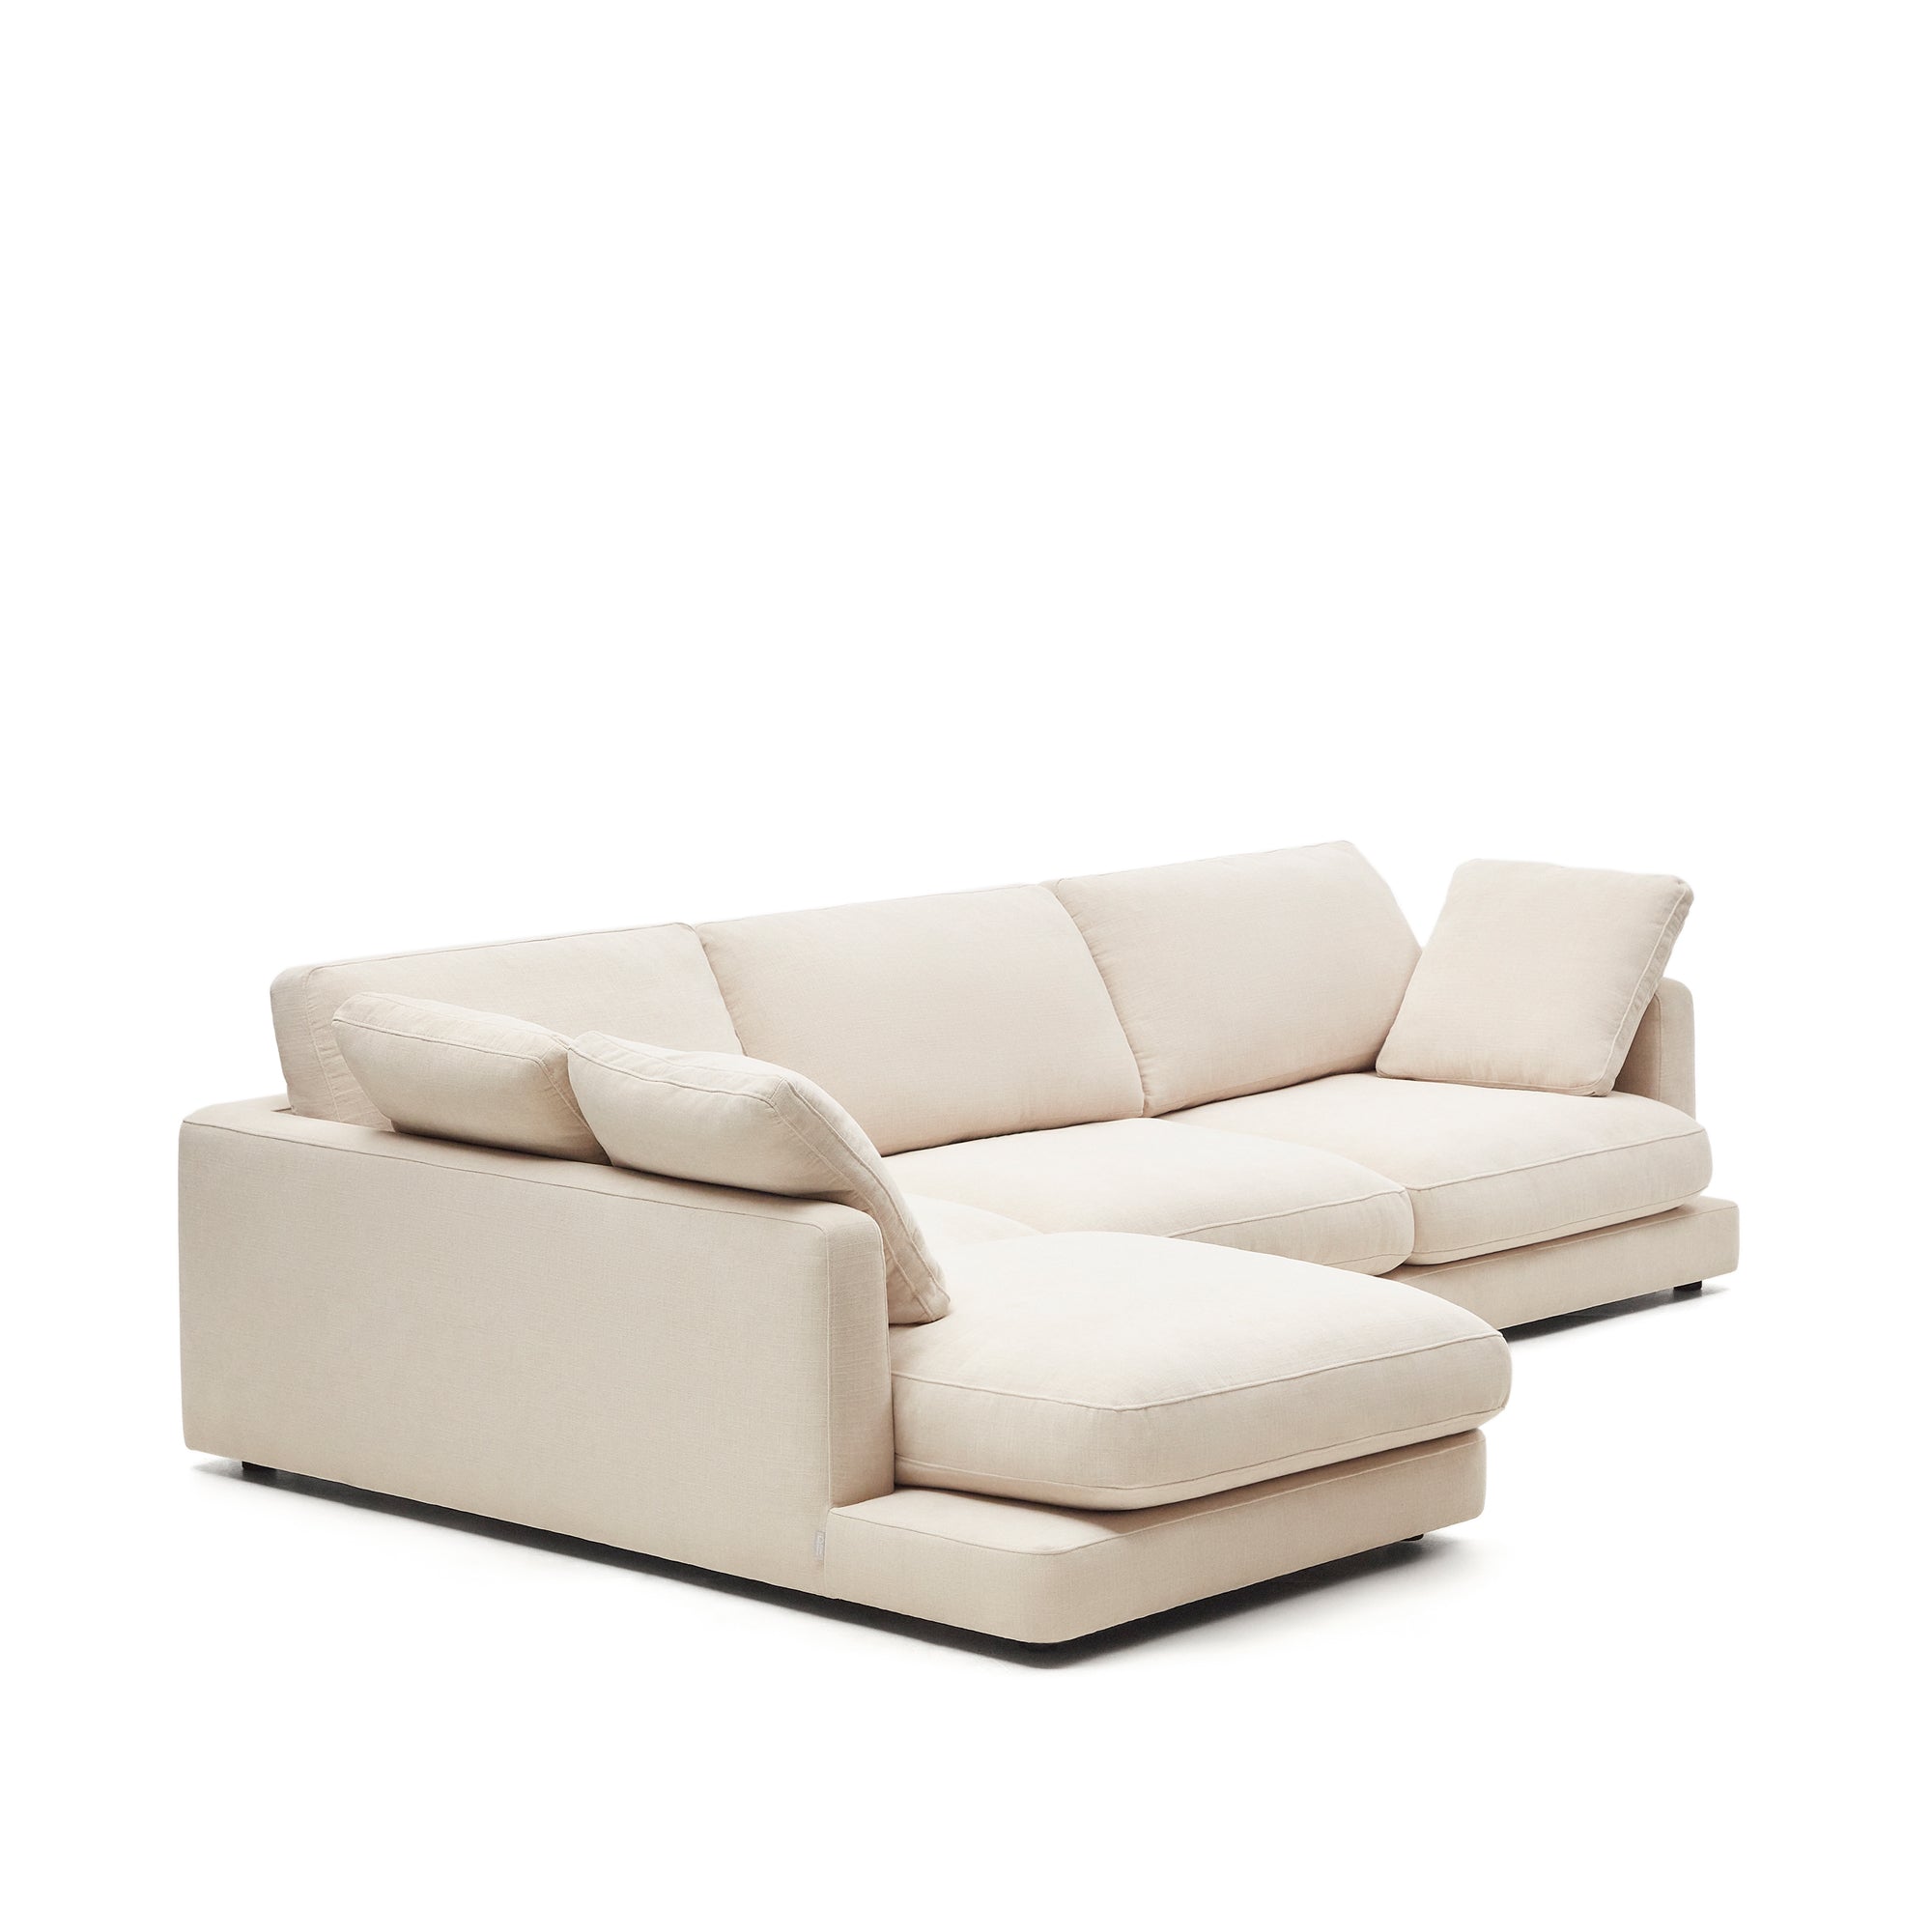 Gala 4 seater sofa with left side chaise longue in beige, 300 cm